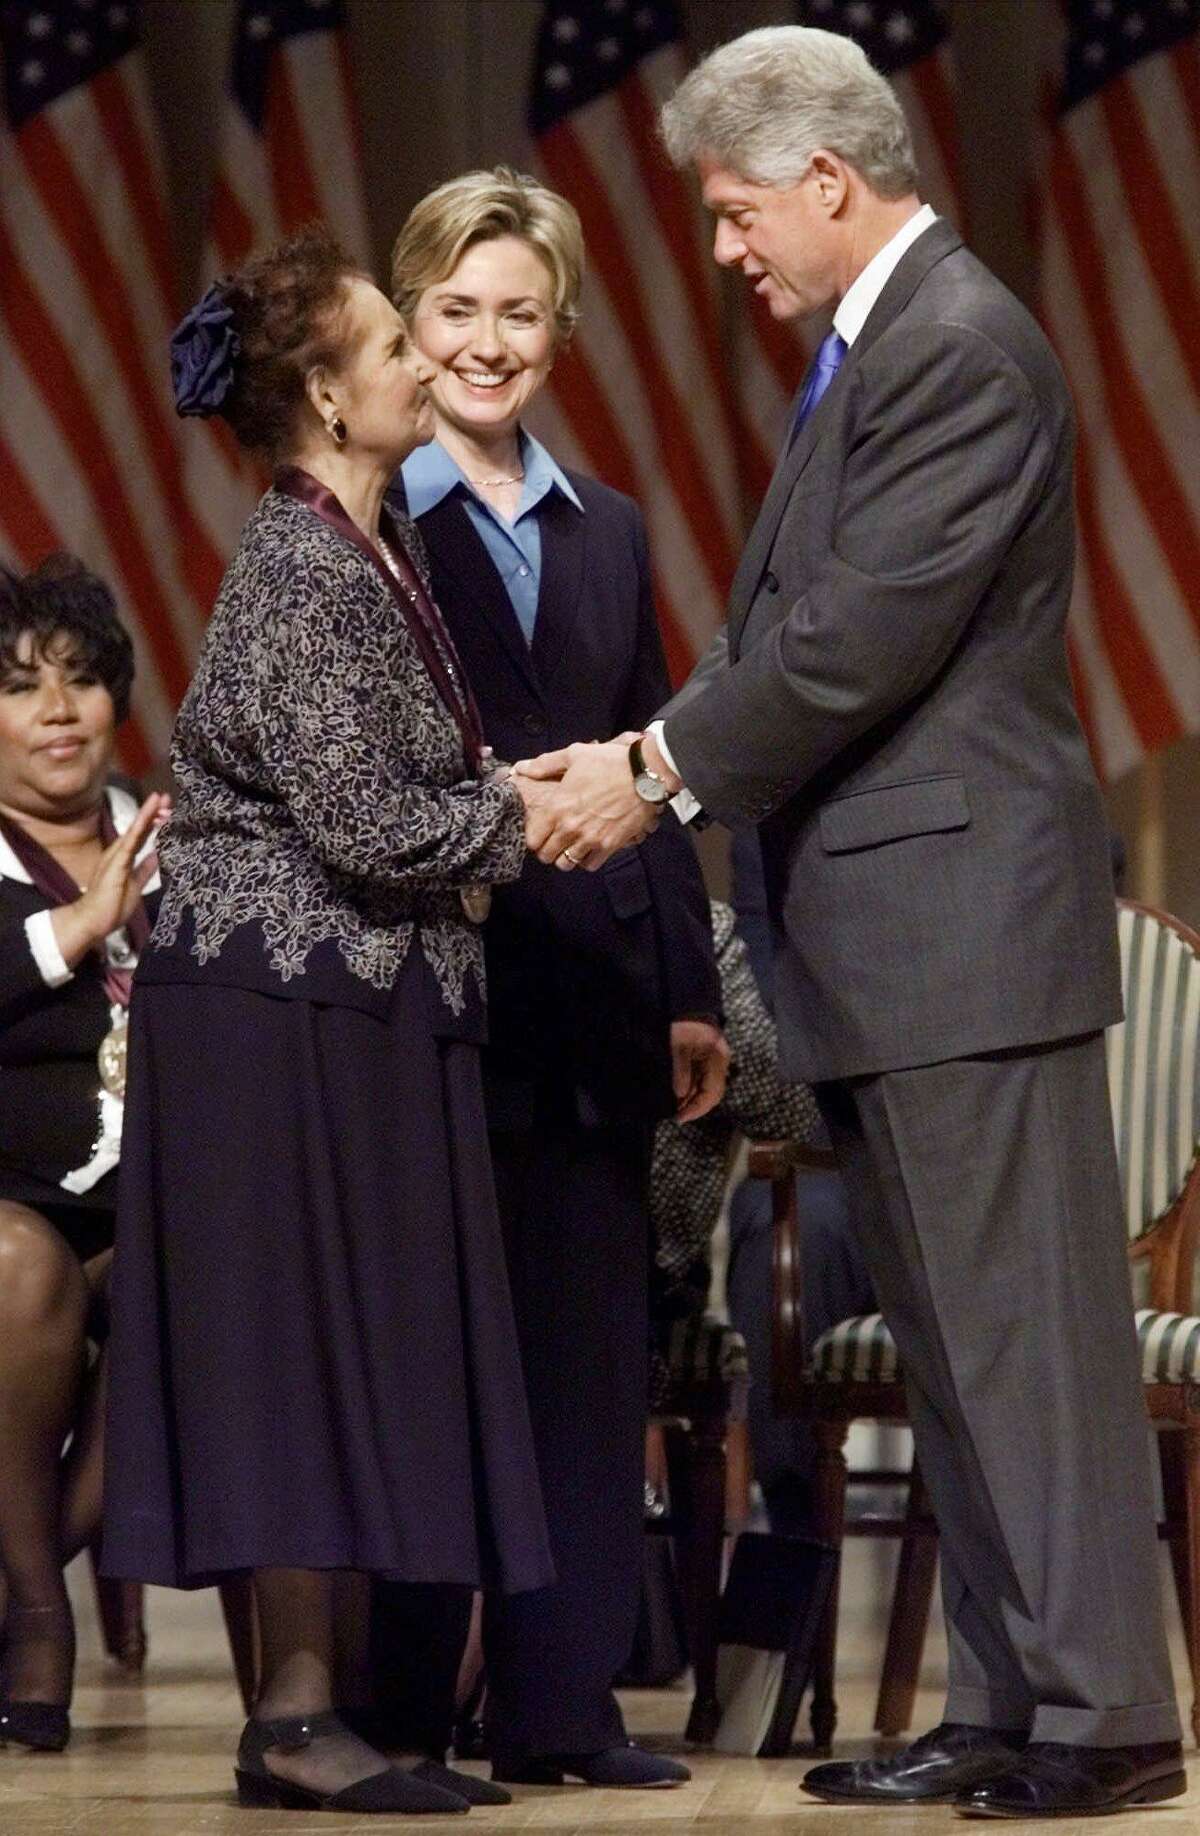 President Clinton talks with Mexican singer Lydia Mendoza after presenting her with a National Medal of Arts, Wednesday Sept. 29, 1999 in Washington. First lady Hillary Rodham Clinton is at center. (AP Photo/Khue Bui)